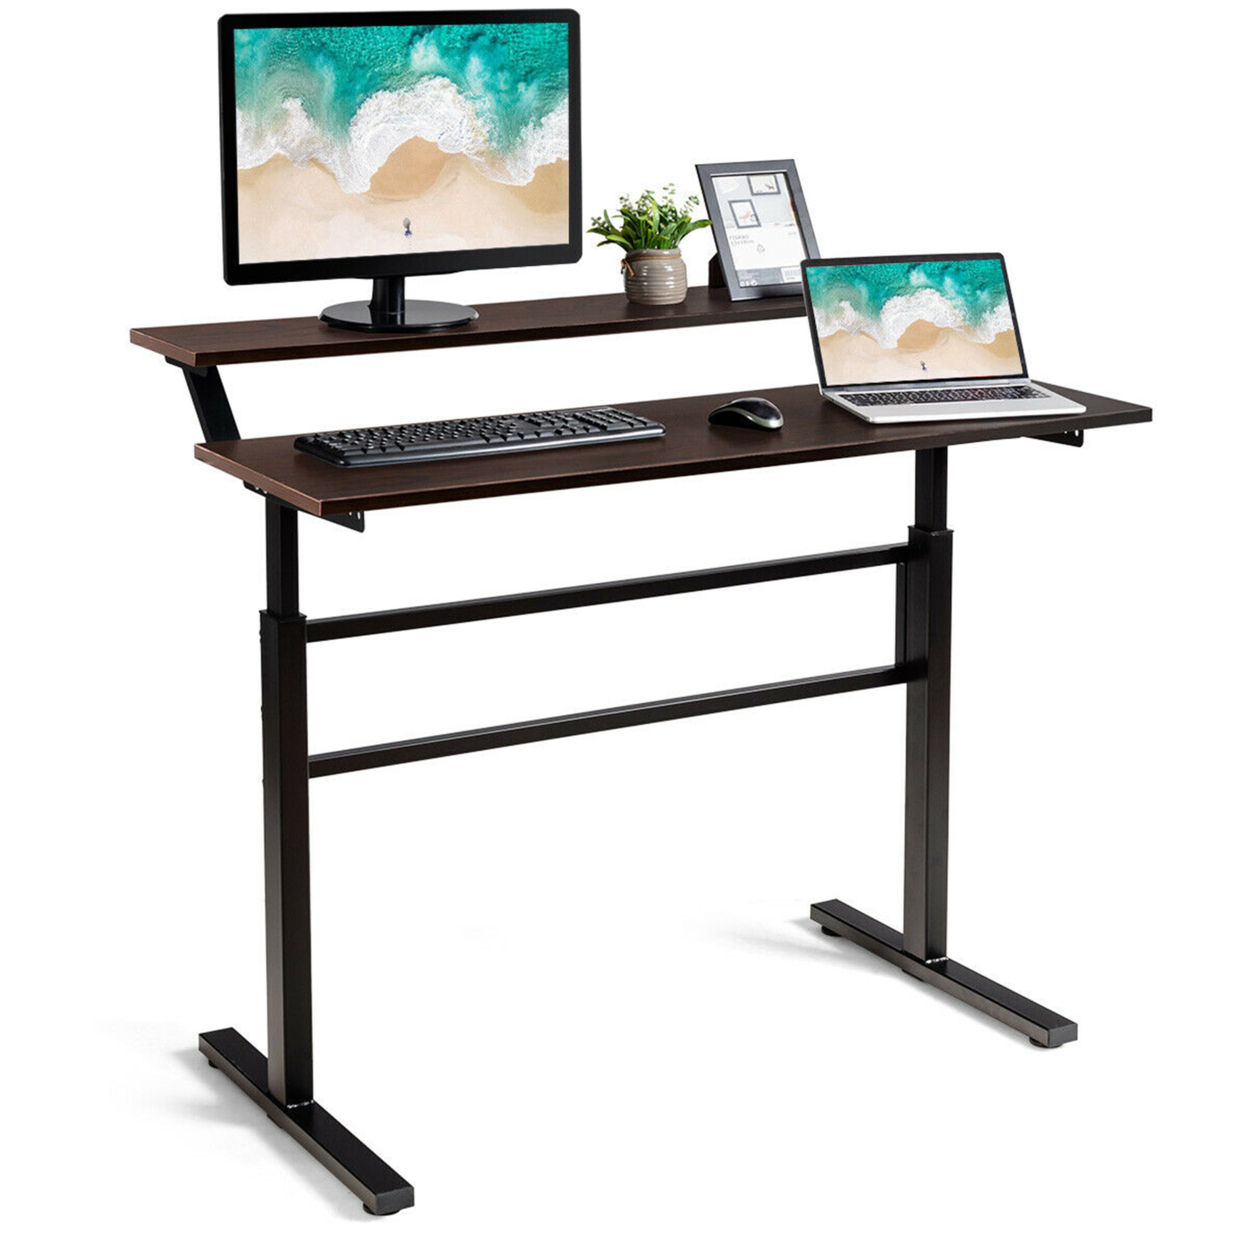 Standing Desk Crank Adjustable Sit To Stand Workstation With Monitor Shelf - Brown